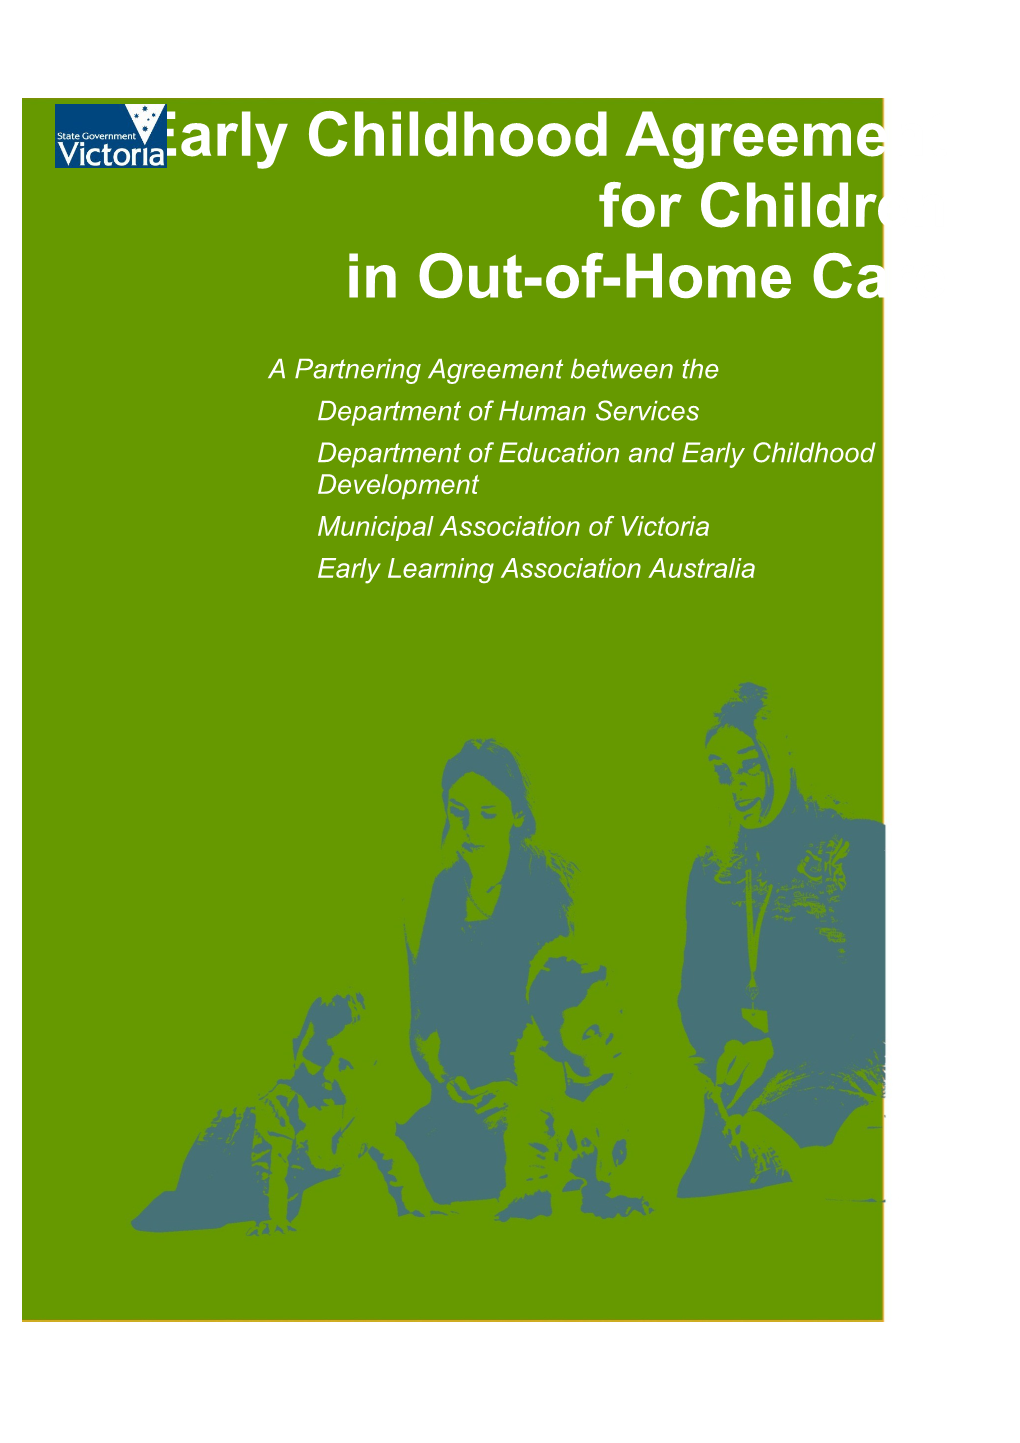 Early Childhood Agreement for Children in Out-Of-Home Care